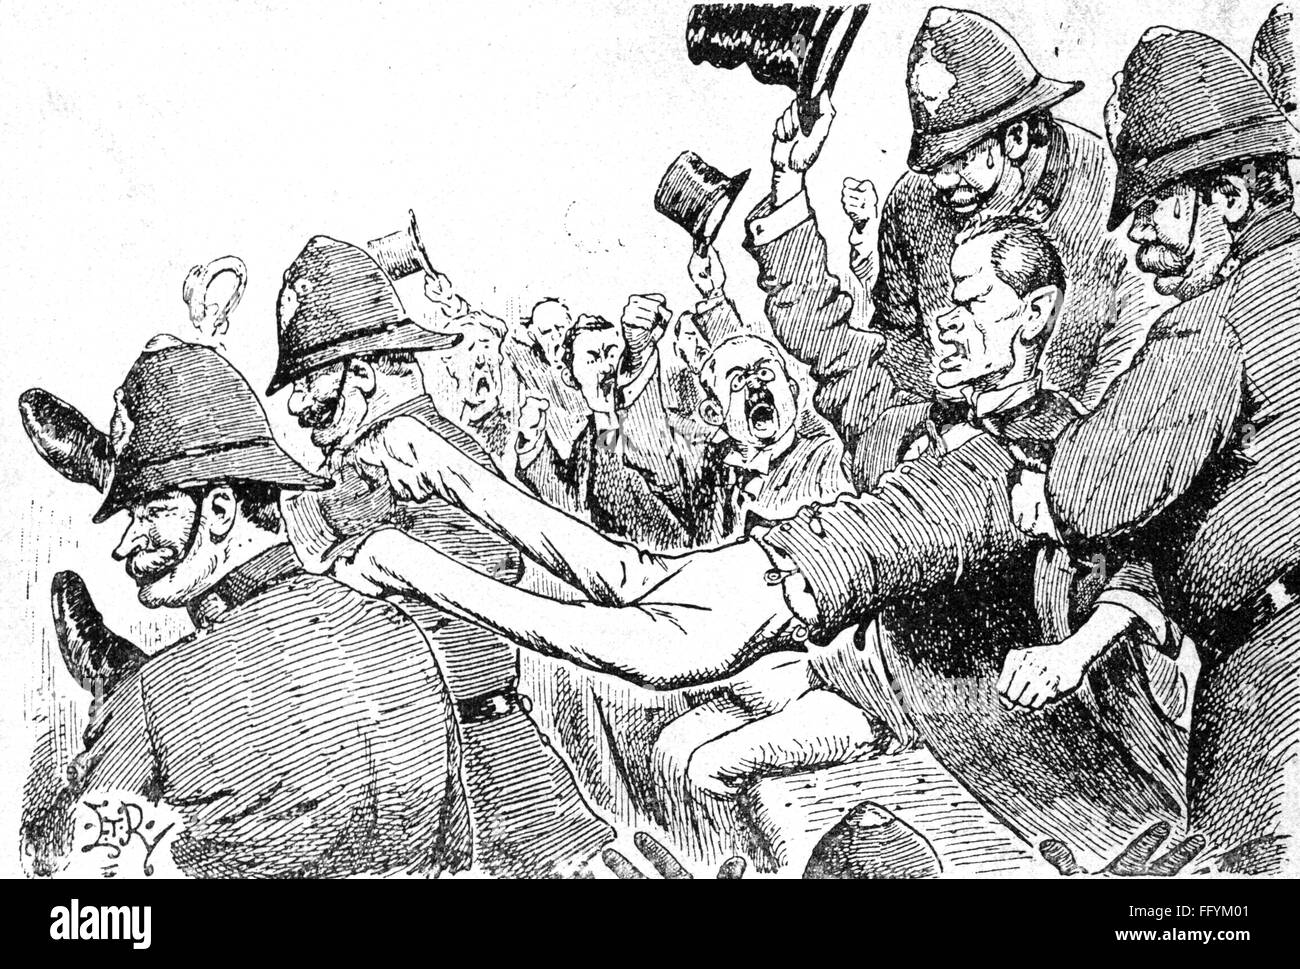 politics, caricature, Great Britain, an Irish representative is removed from the British parliament, 'Quite like at Home', wood engraving, 'Punch', London, 1901, Additional-Rights-Clearences-Not Available Stock Photo